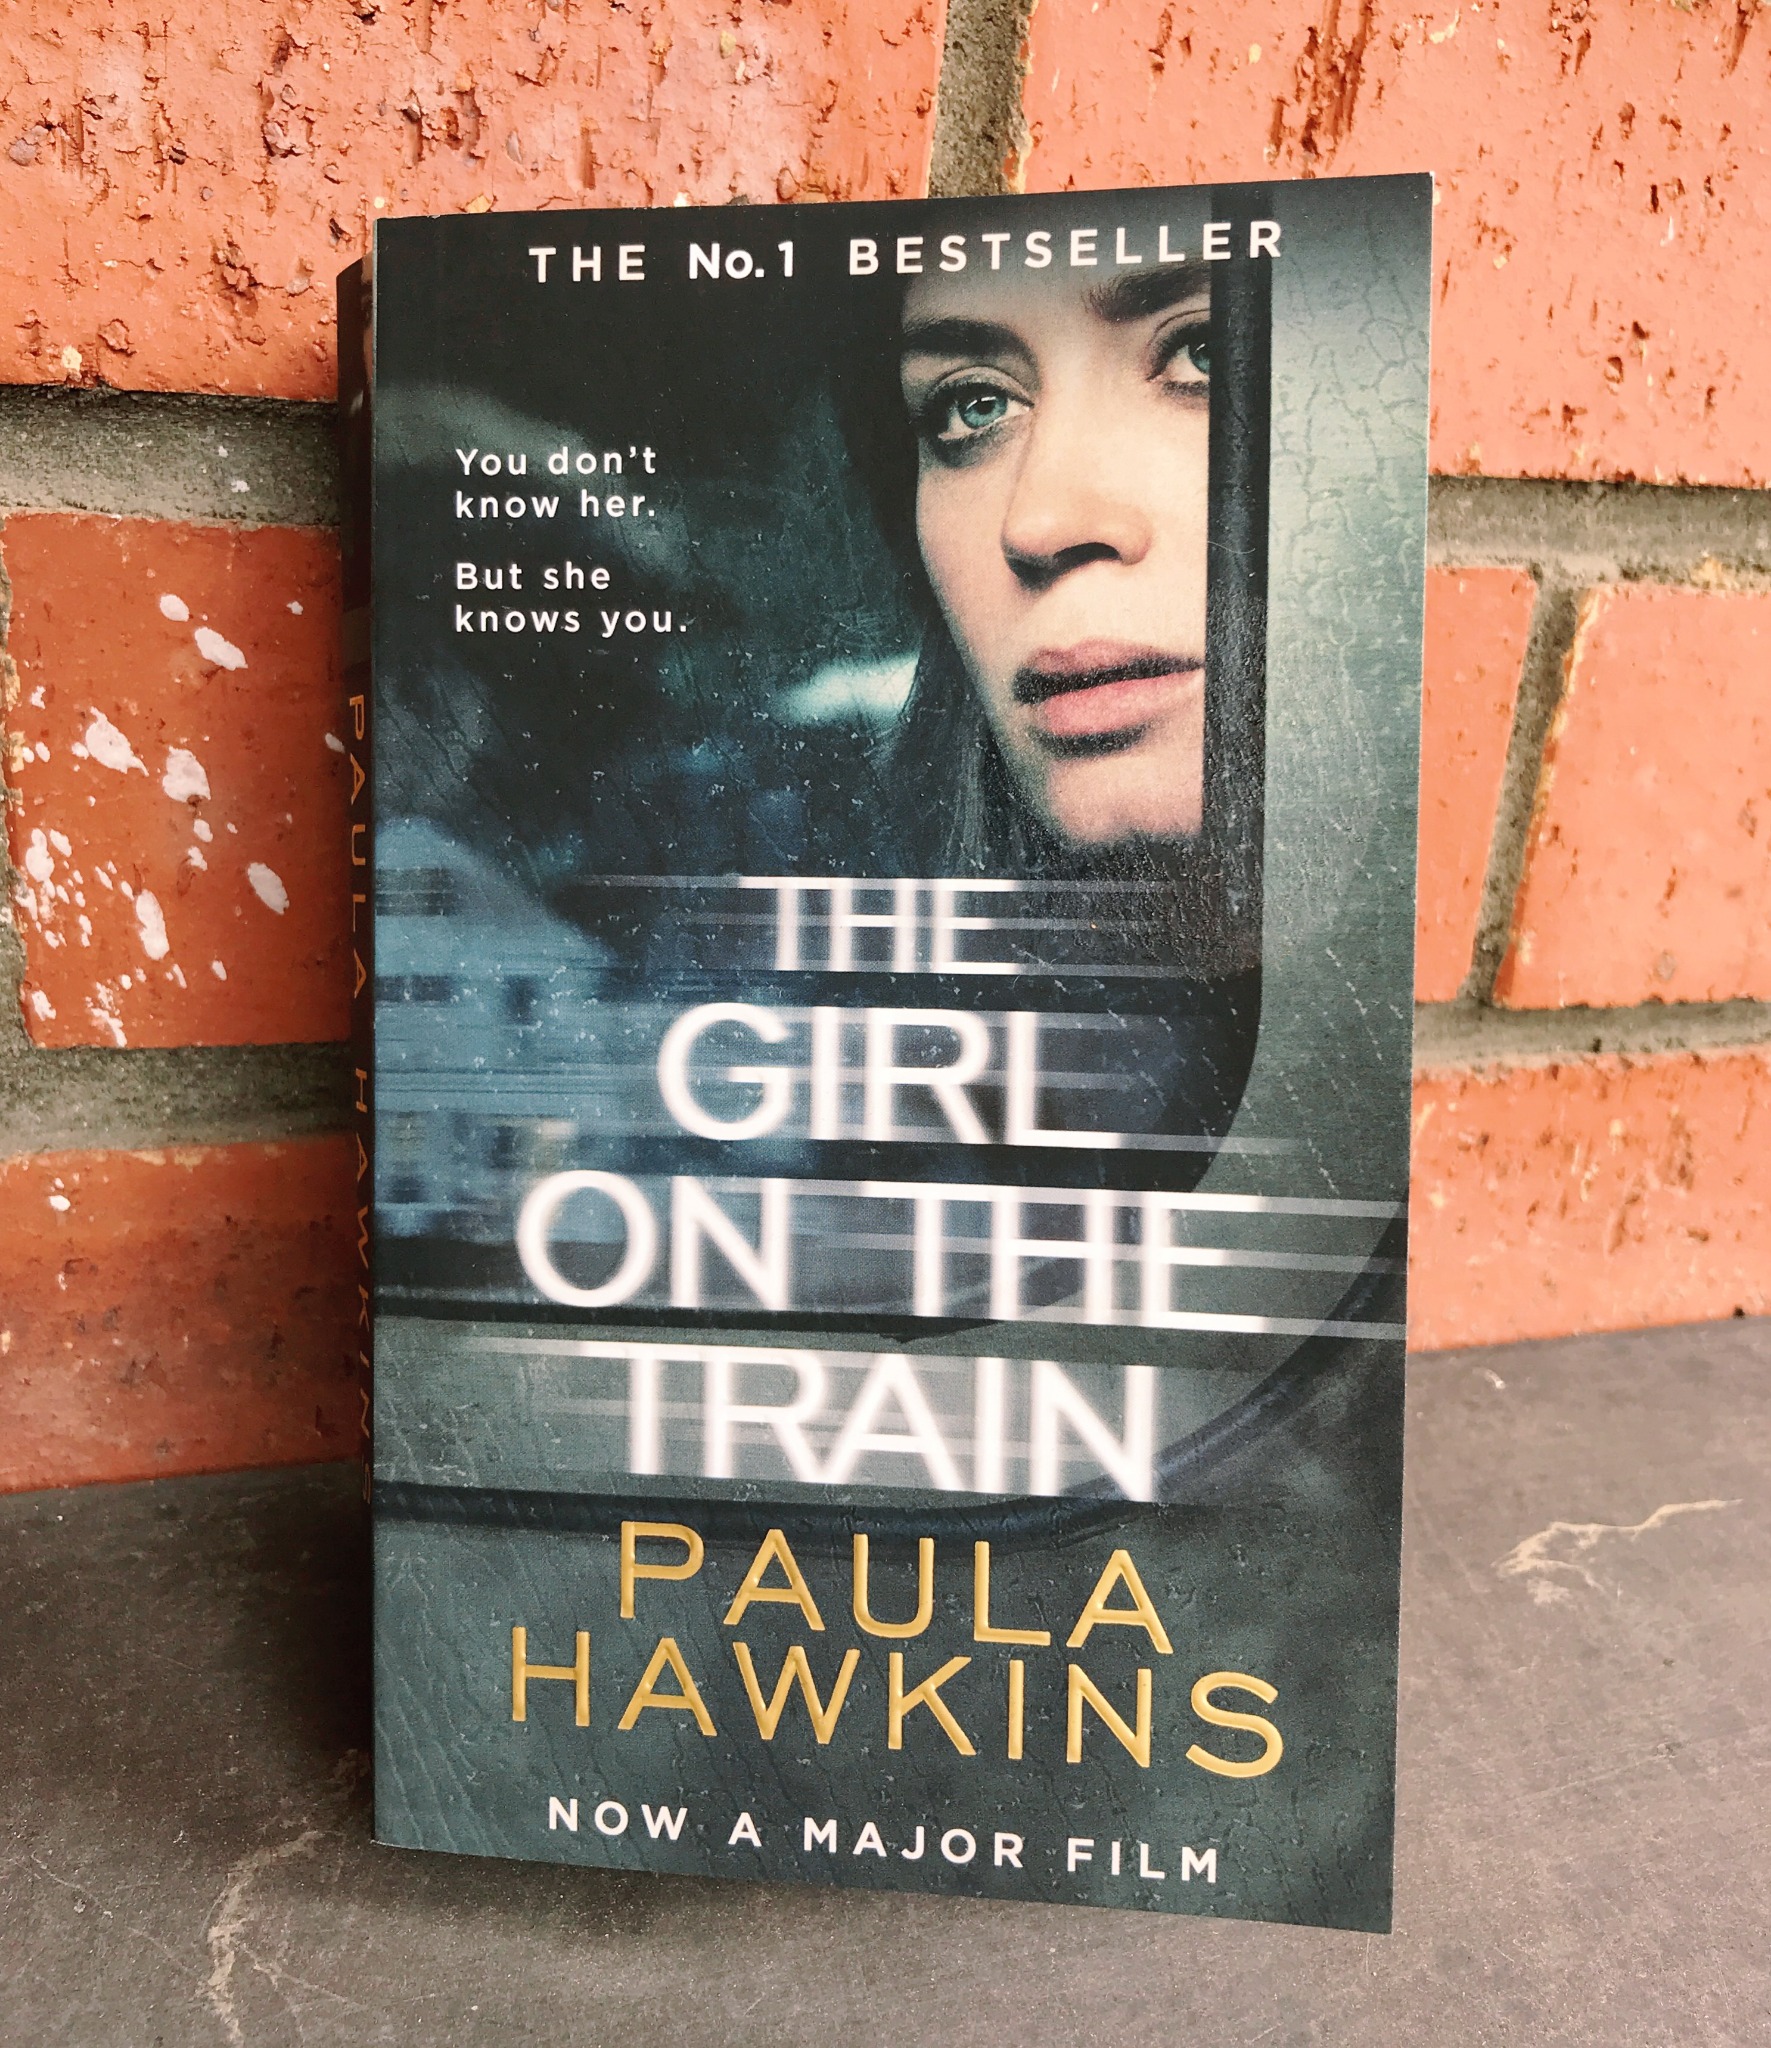 The Girl on the Trail Paula Hawkins Book Review